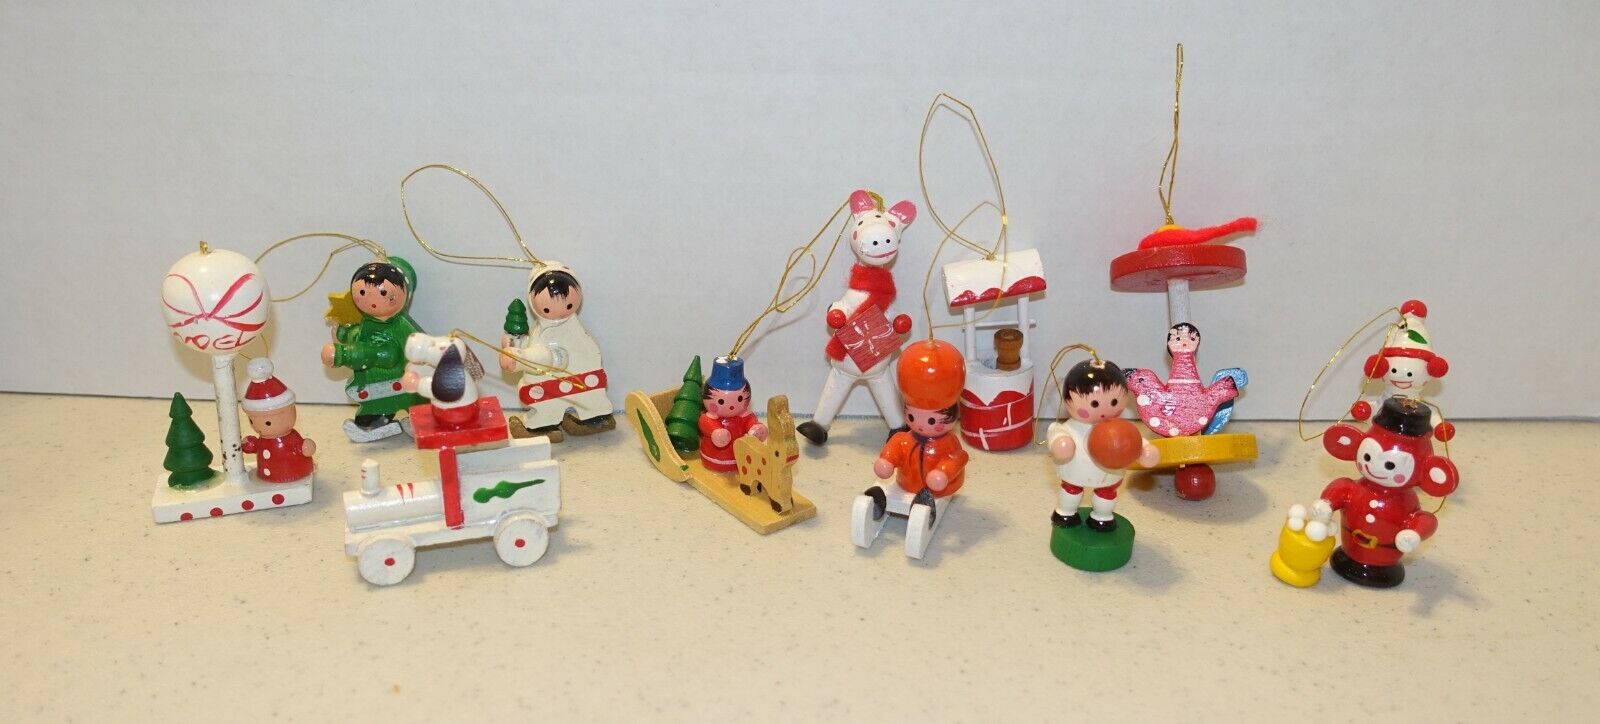 Lot of 12 Wooden Christmas 2.5" Ornaments/Circus, Ice Skates, Sled - Taiwan Без бренда